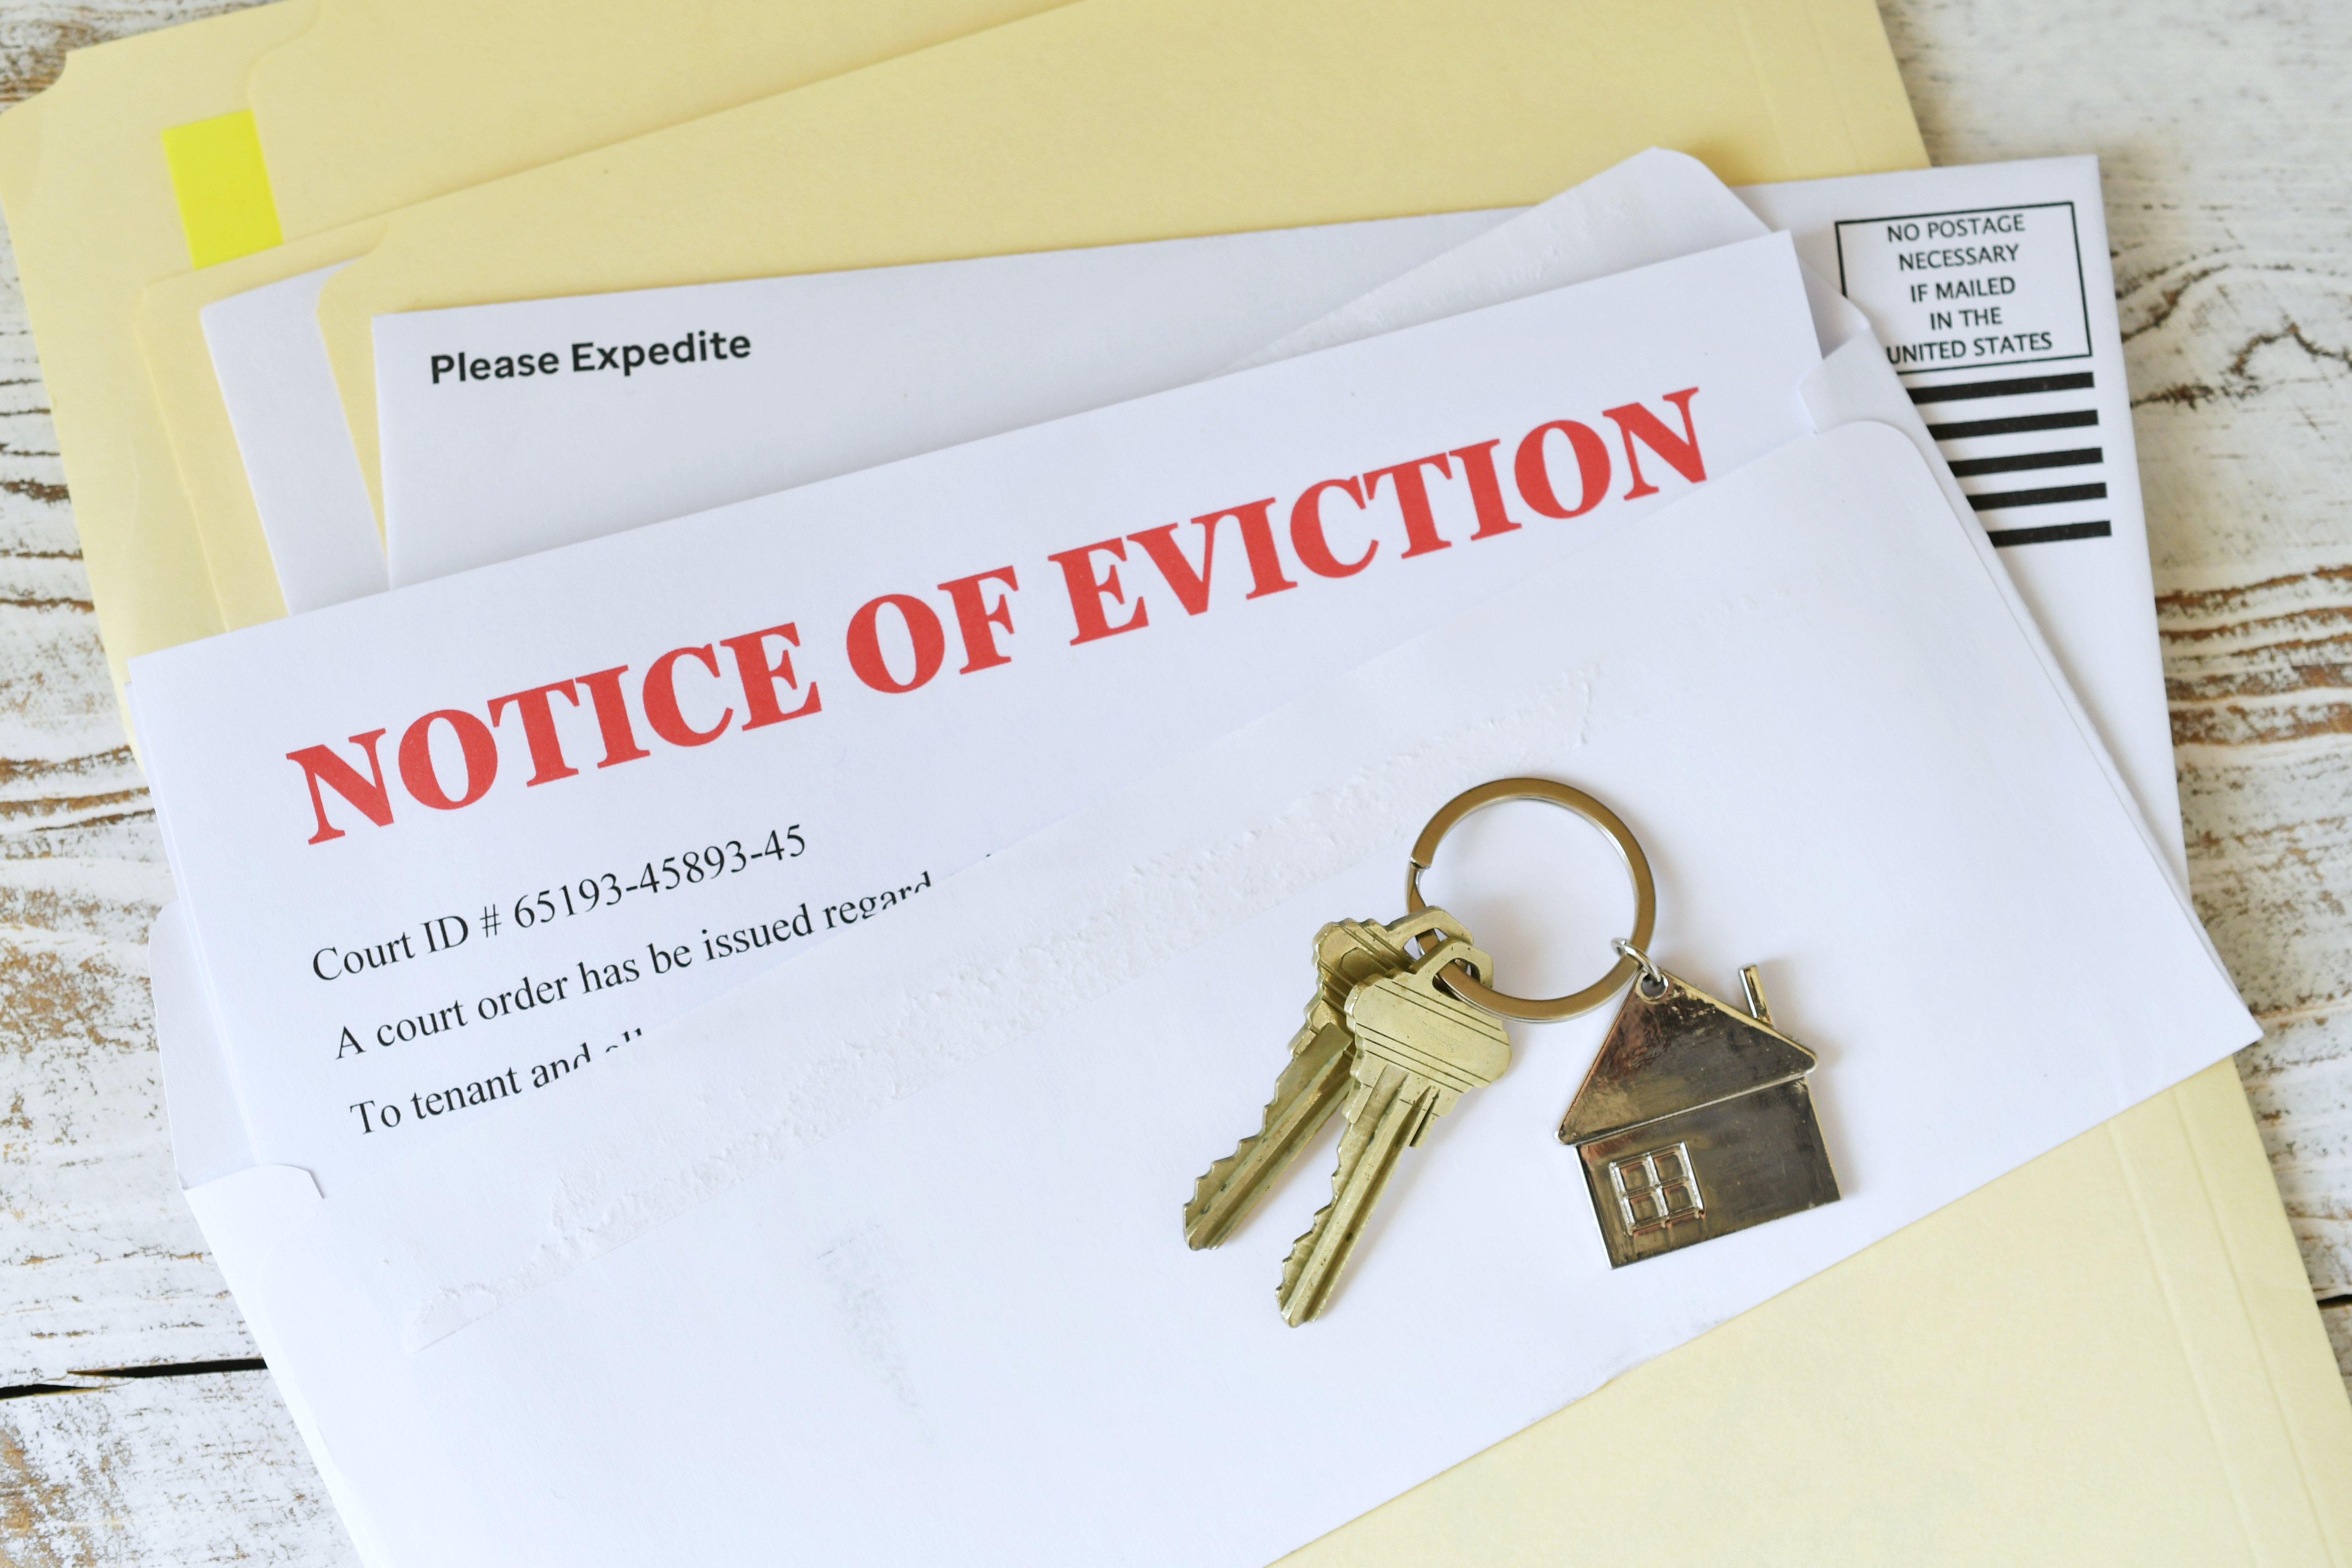 notice-of-eviction-court-papers-informing-tenant-2022-11-14-10-42-56-utc (1)